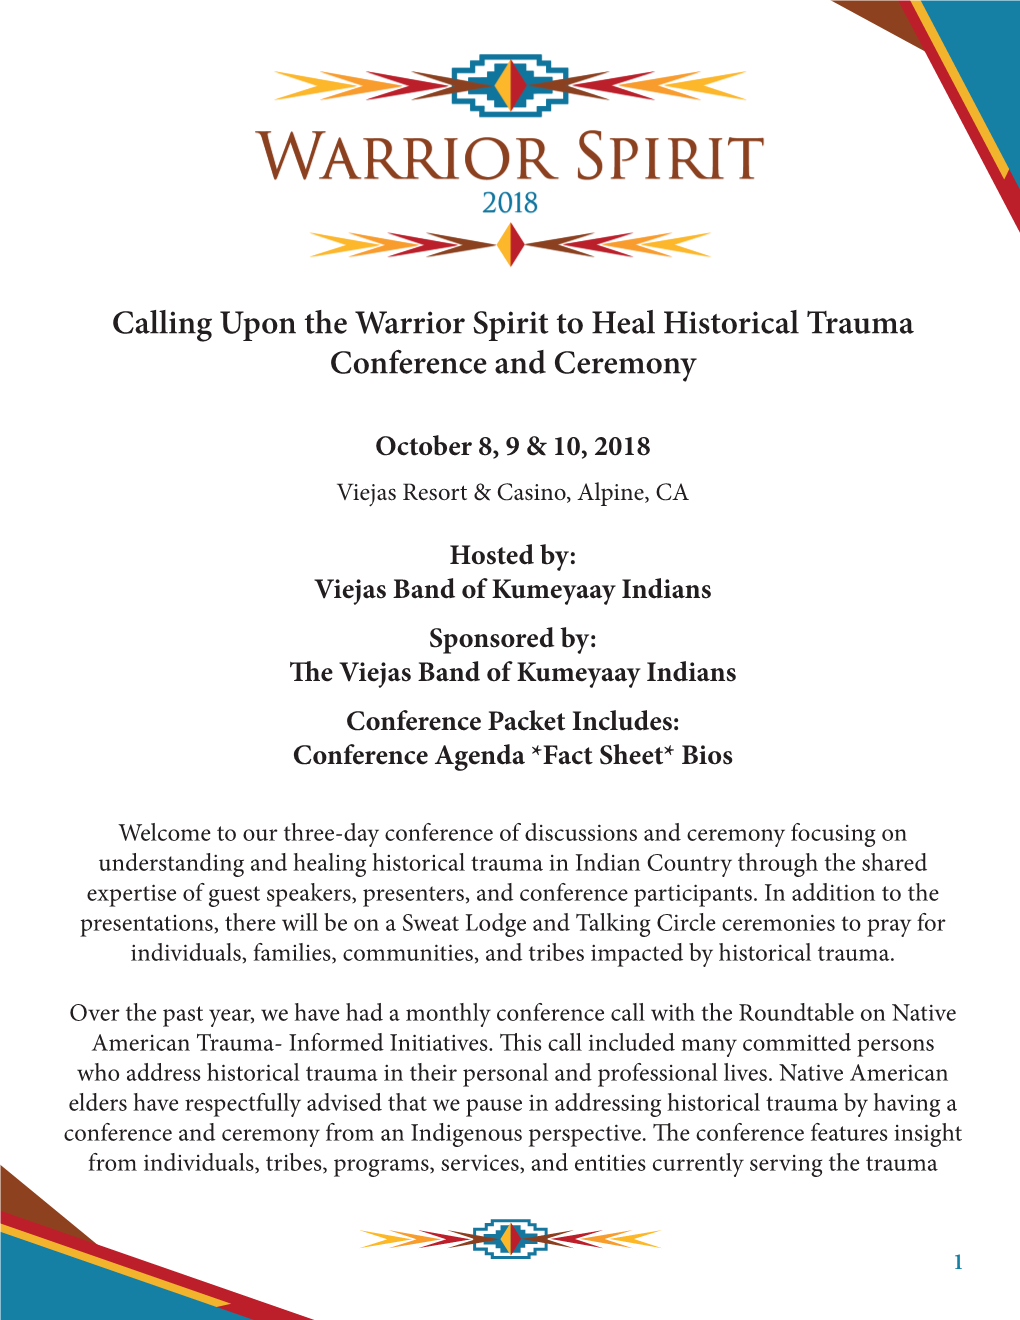 Calling Upon the Warrior Spirit to Heal Historical Trauma Conference and Ceremony